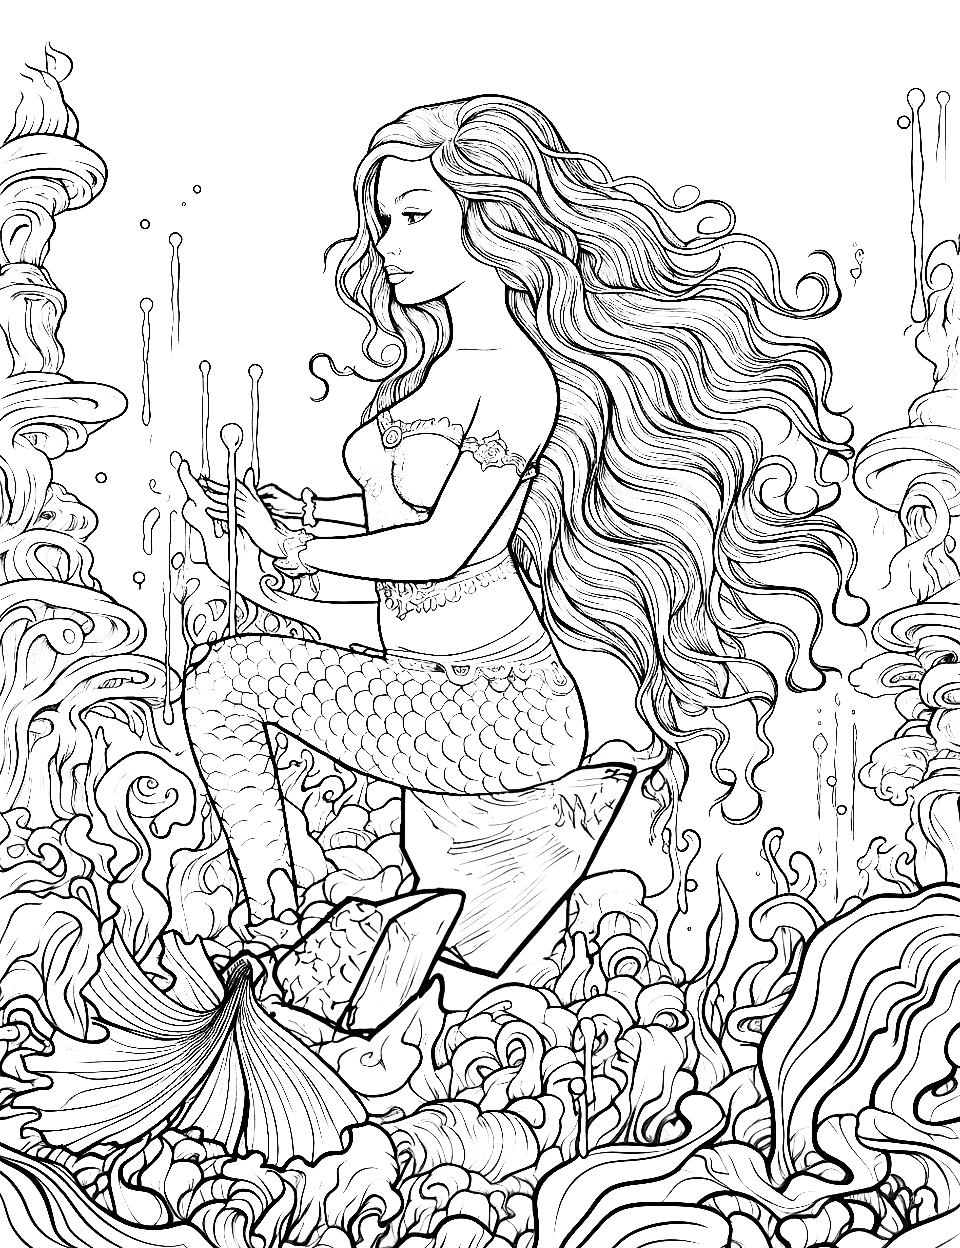 Mythical Mermaid Adult Coloring Page - A mermaid sitting on a rock.